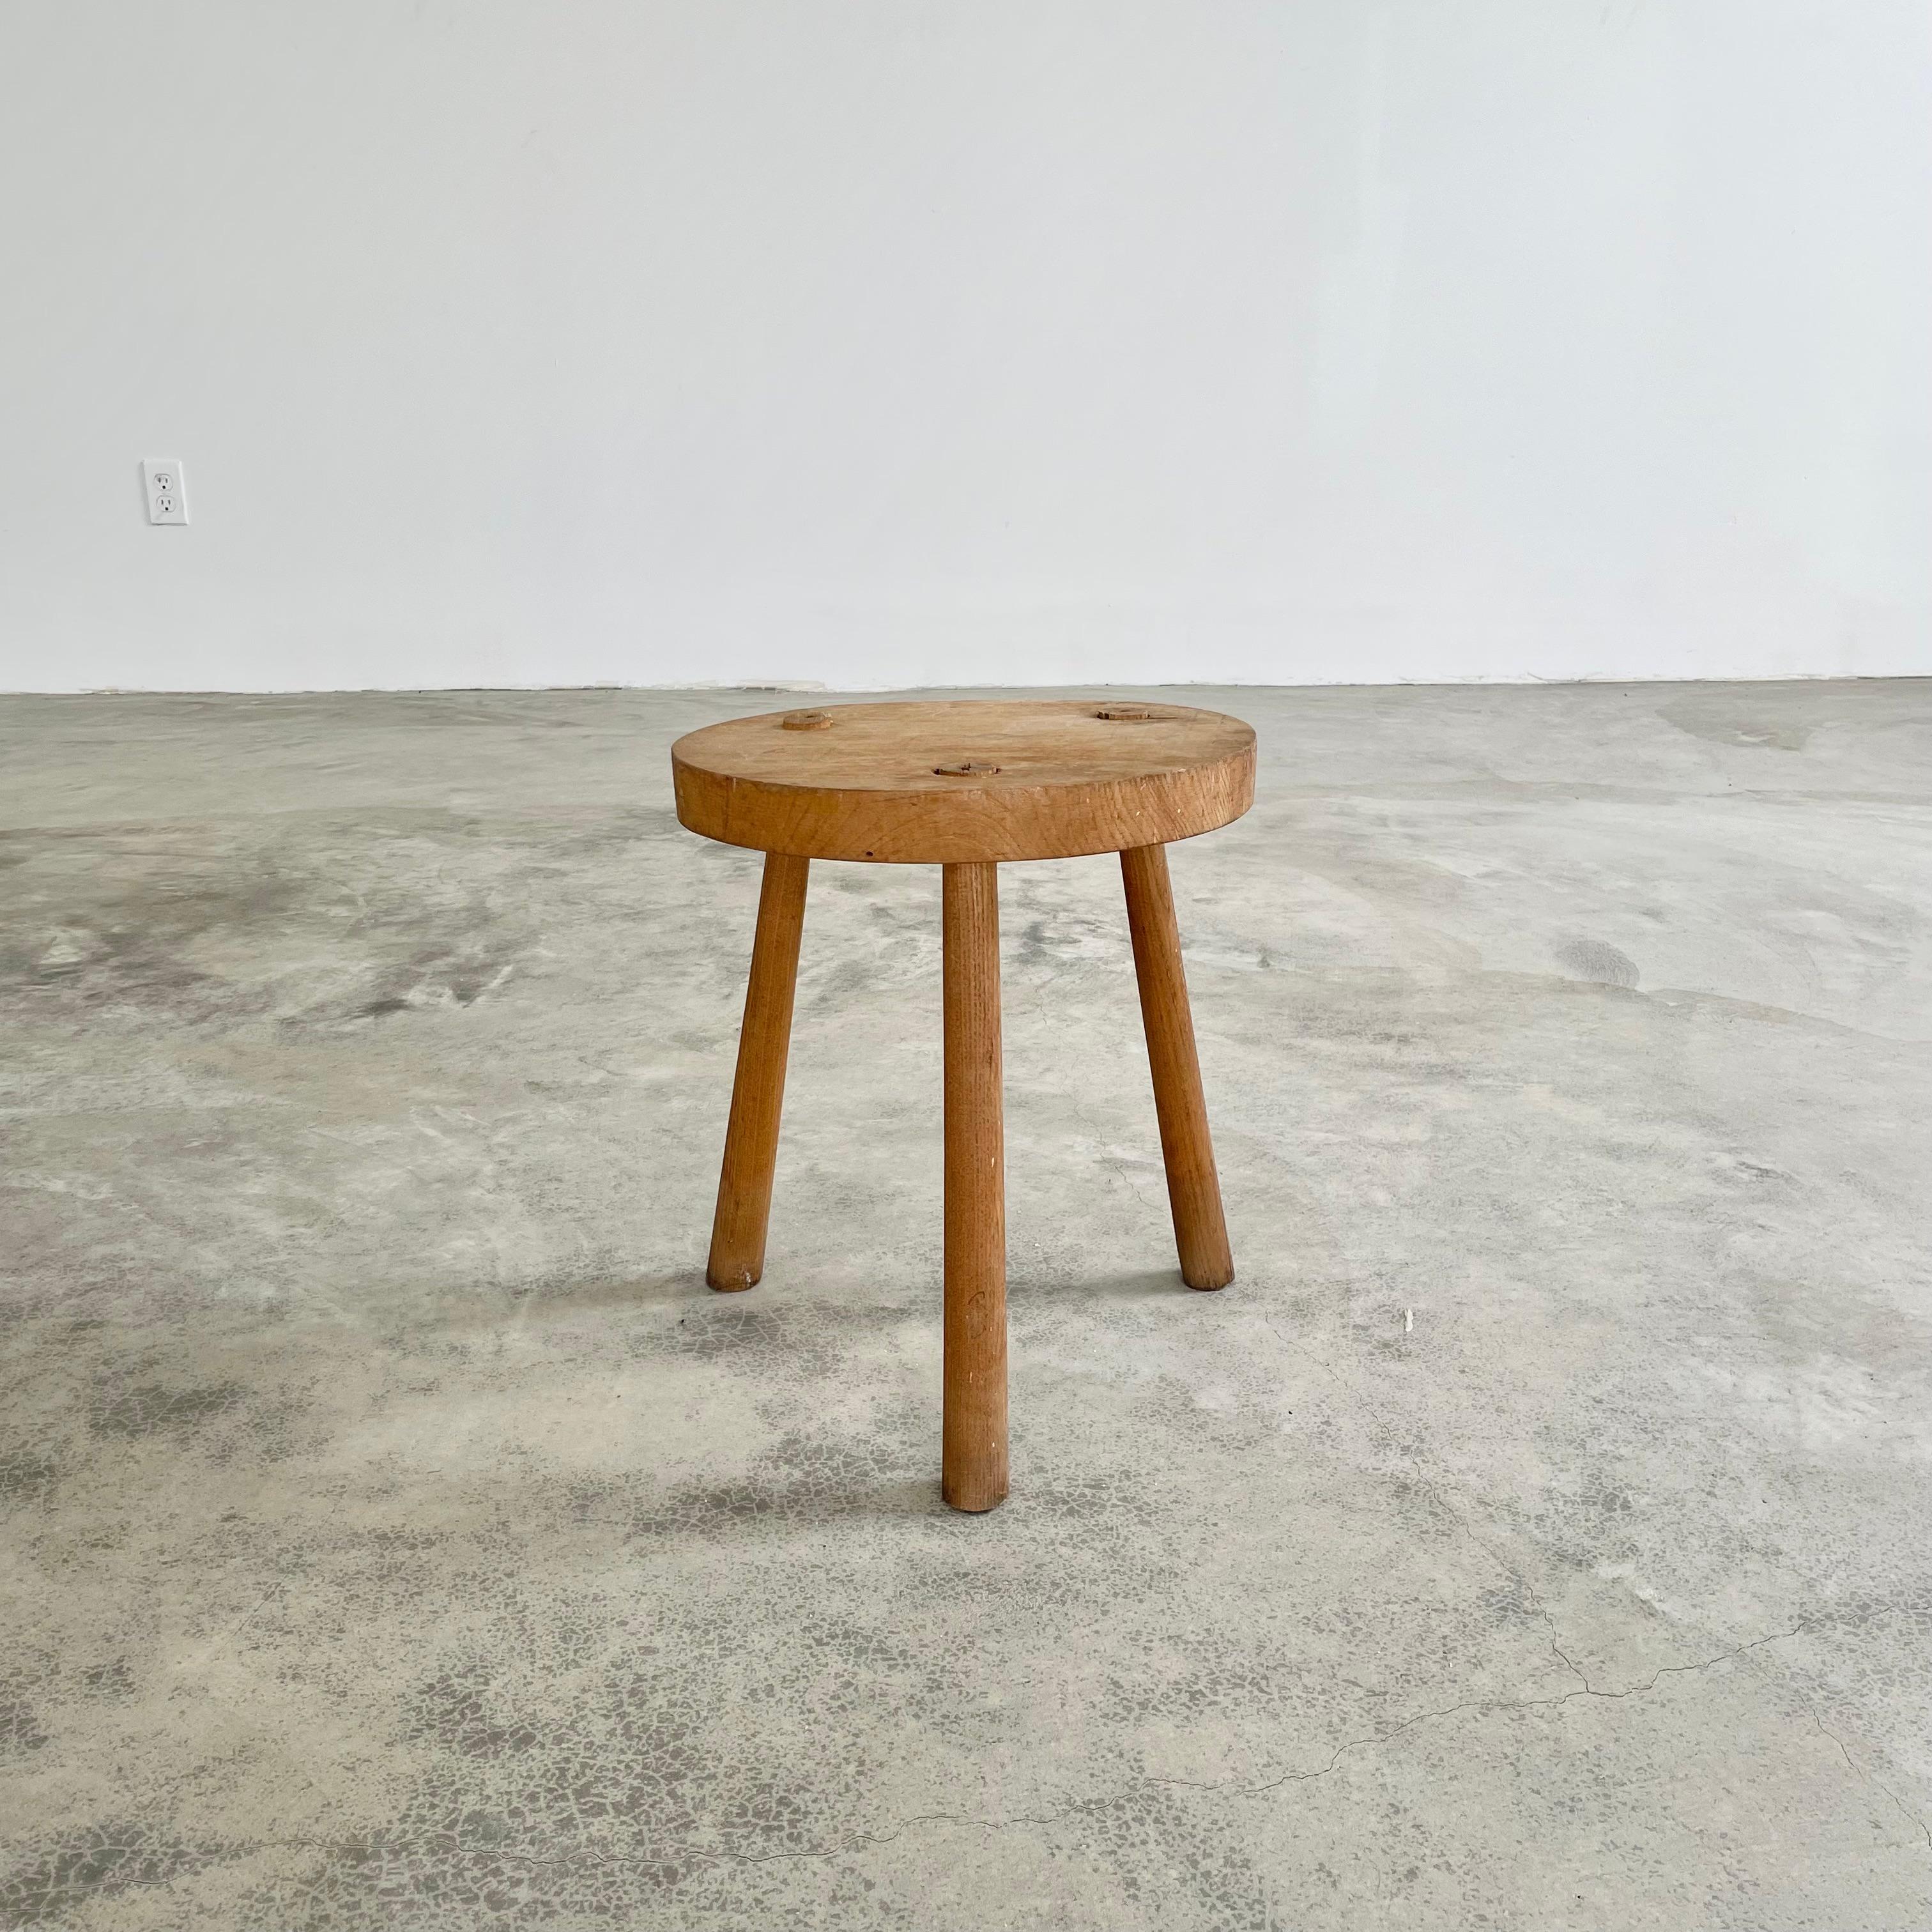 Vintage wooden stool made in France, circa 1960s. Thick round seat and substantial tripod legs that taper getting wider towards the base. Great lines and shape with a very sturdy build. Age, patina and wear as shown.